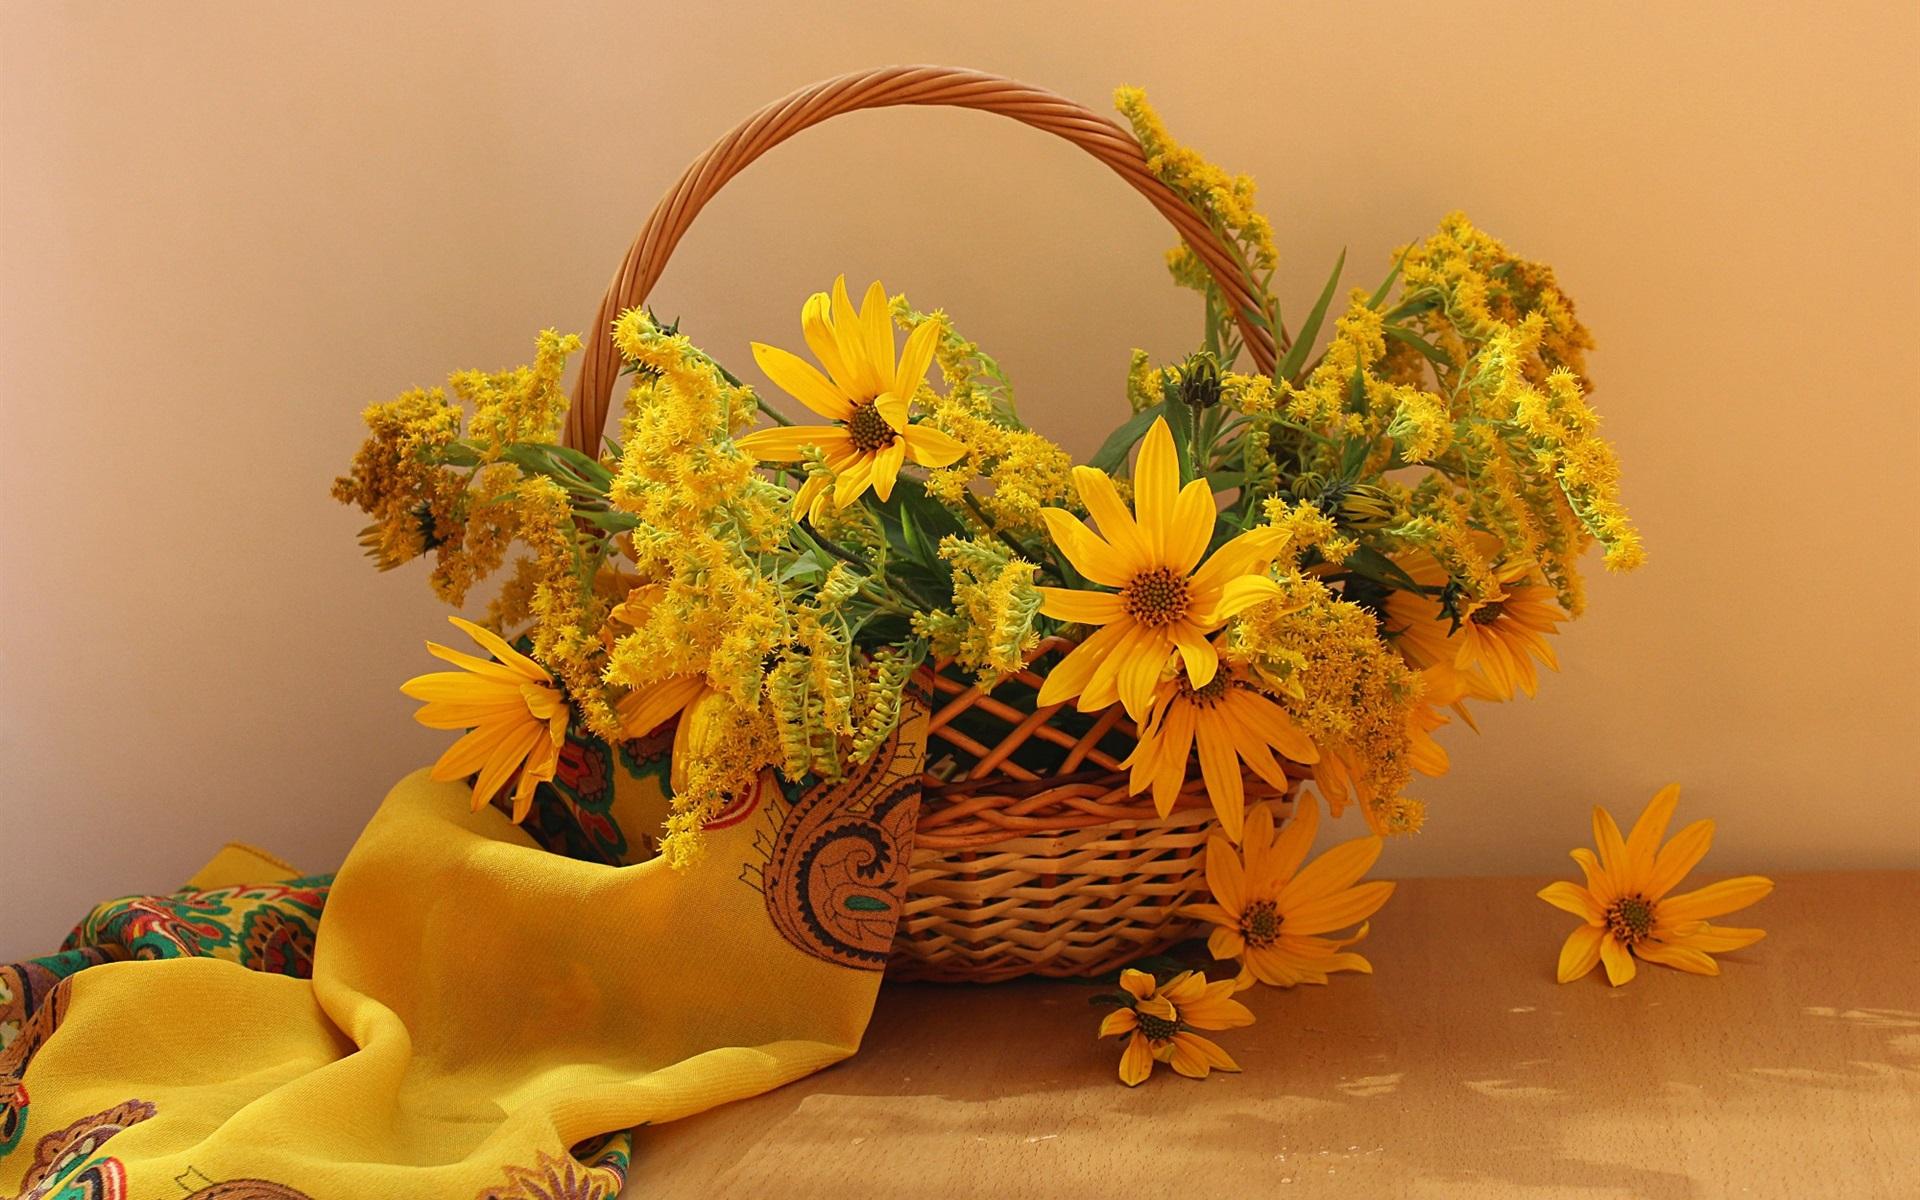 Wallpaper Yellow goldenrod flowers, basket 1920x1200 HD Picture, Image